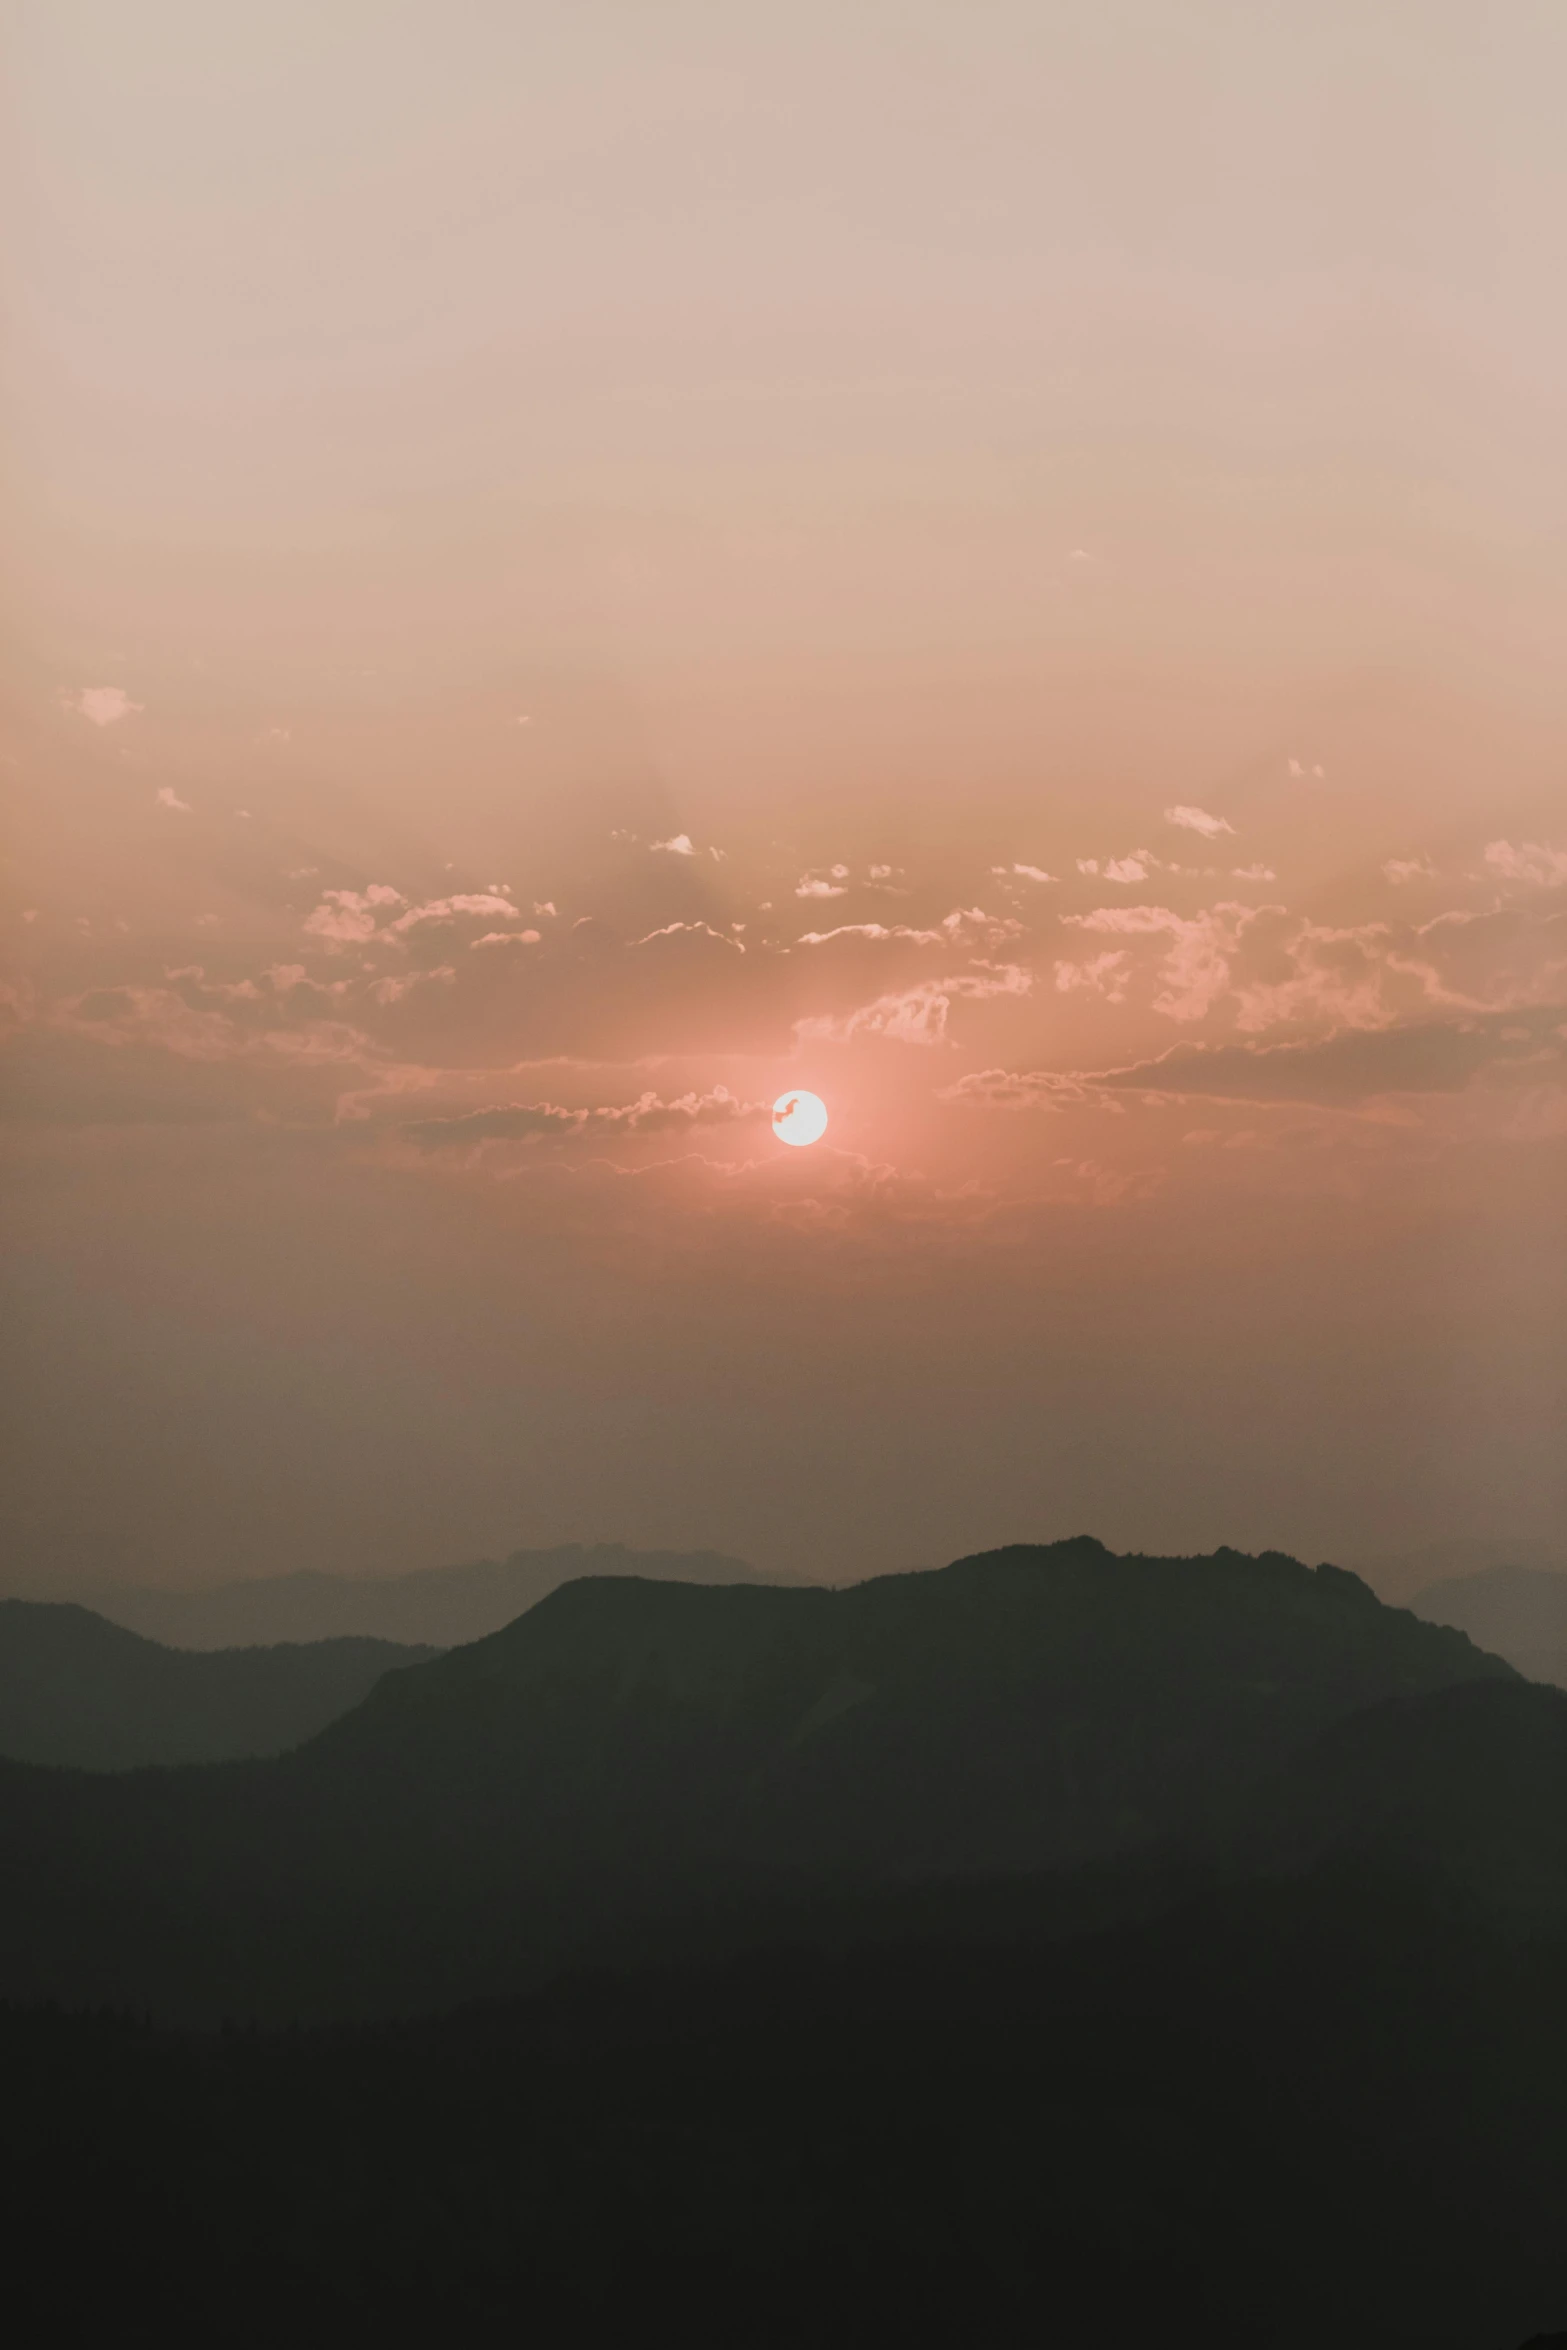 the sun setting over a mountain range with several silhouetted hills in the foreground